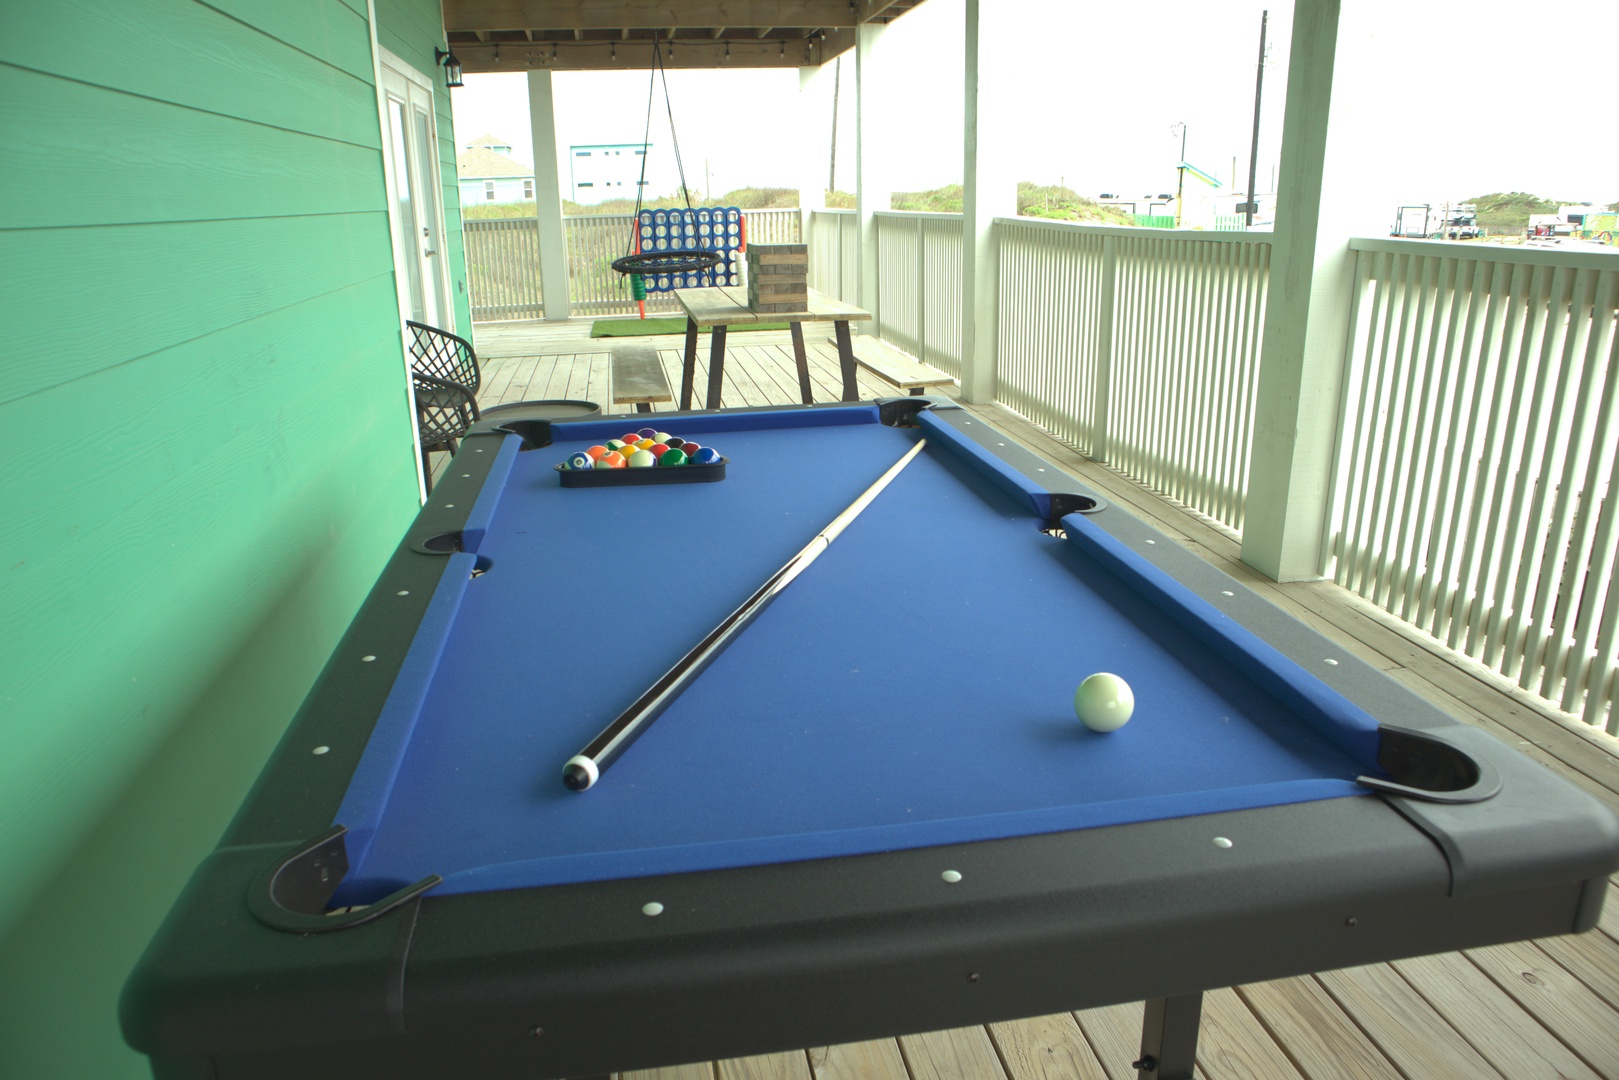 Pool and backyard games with a view of the beach